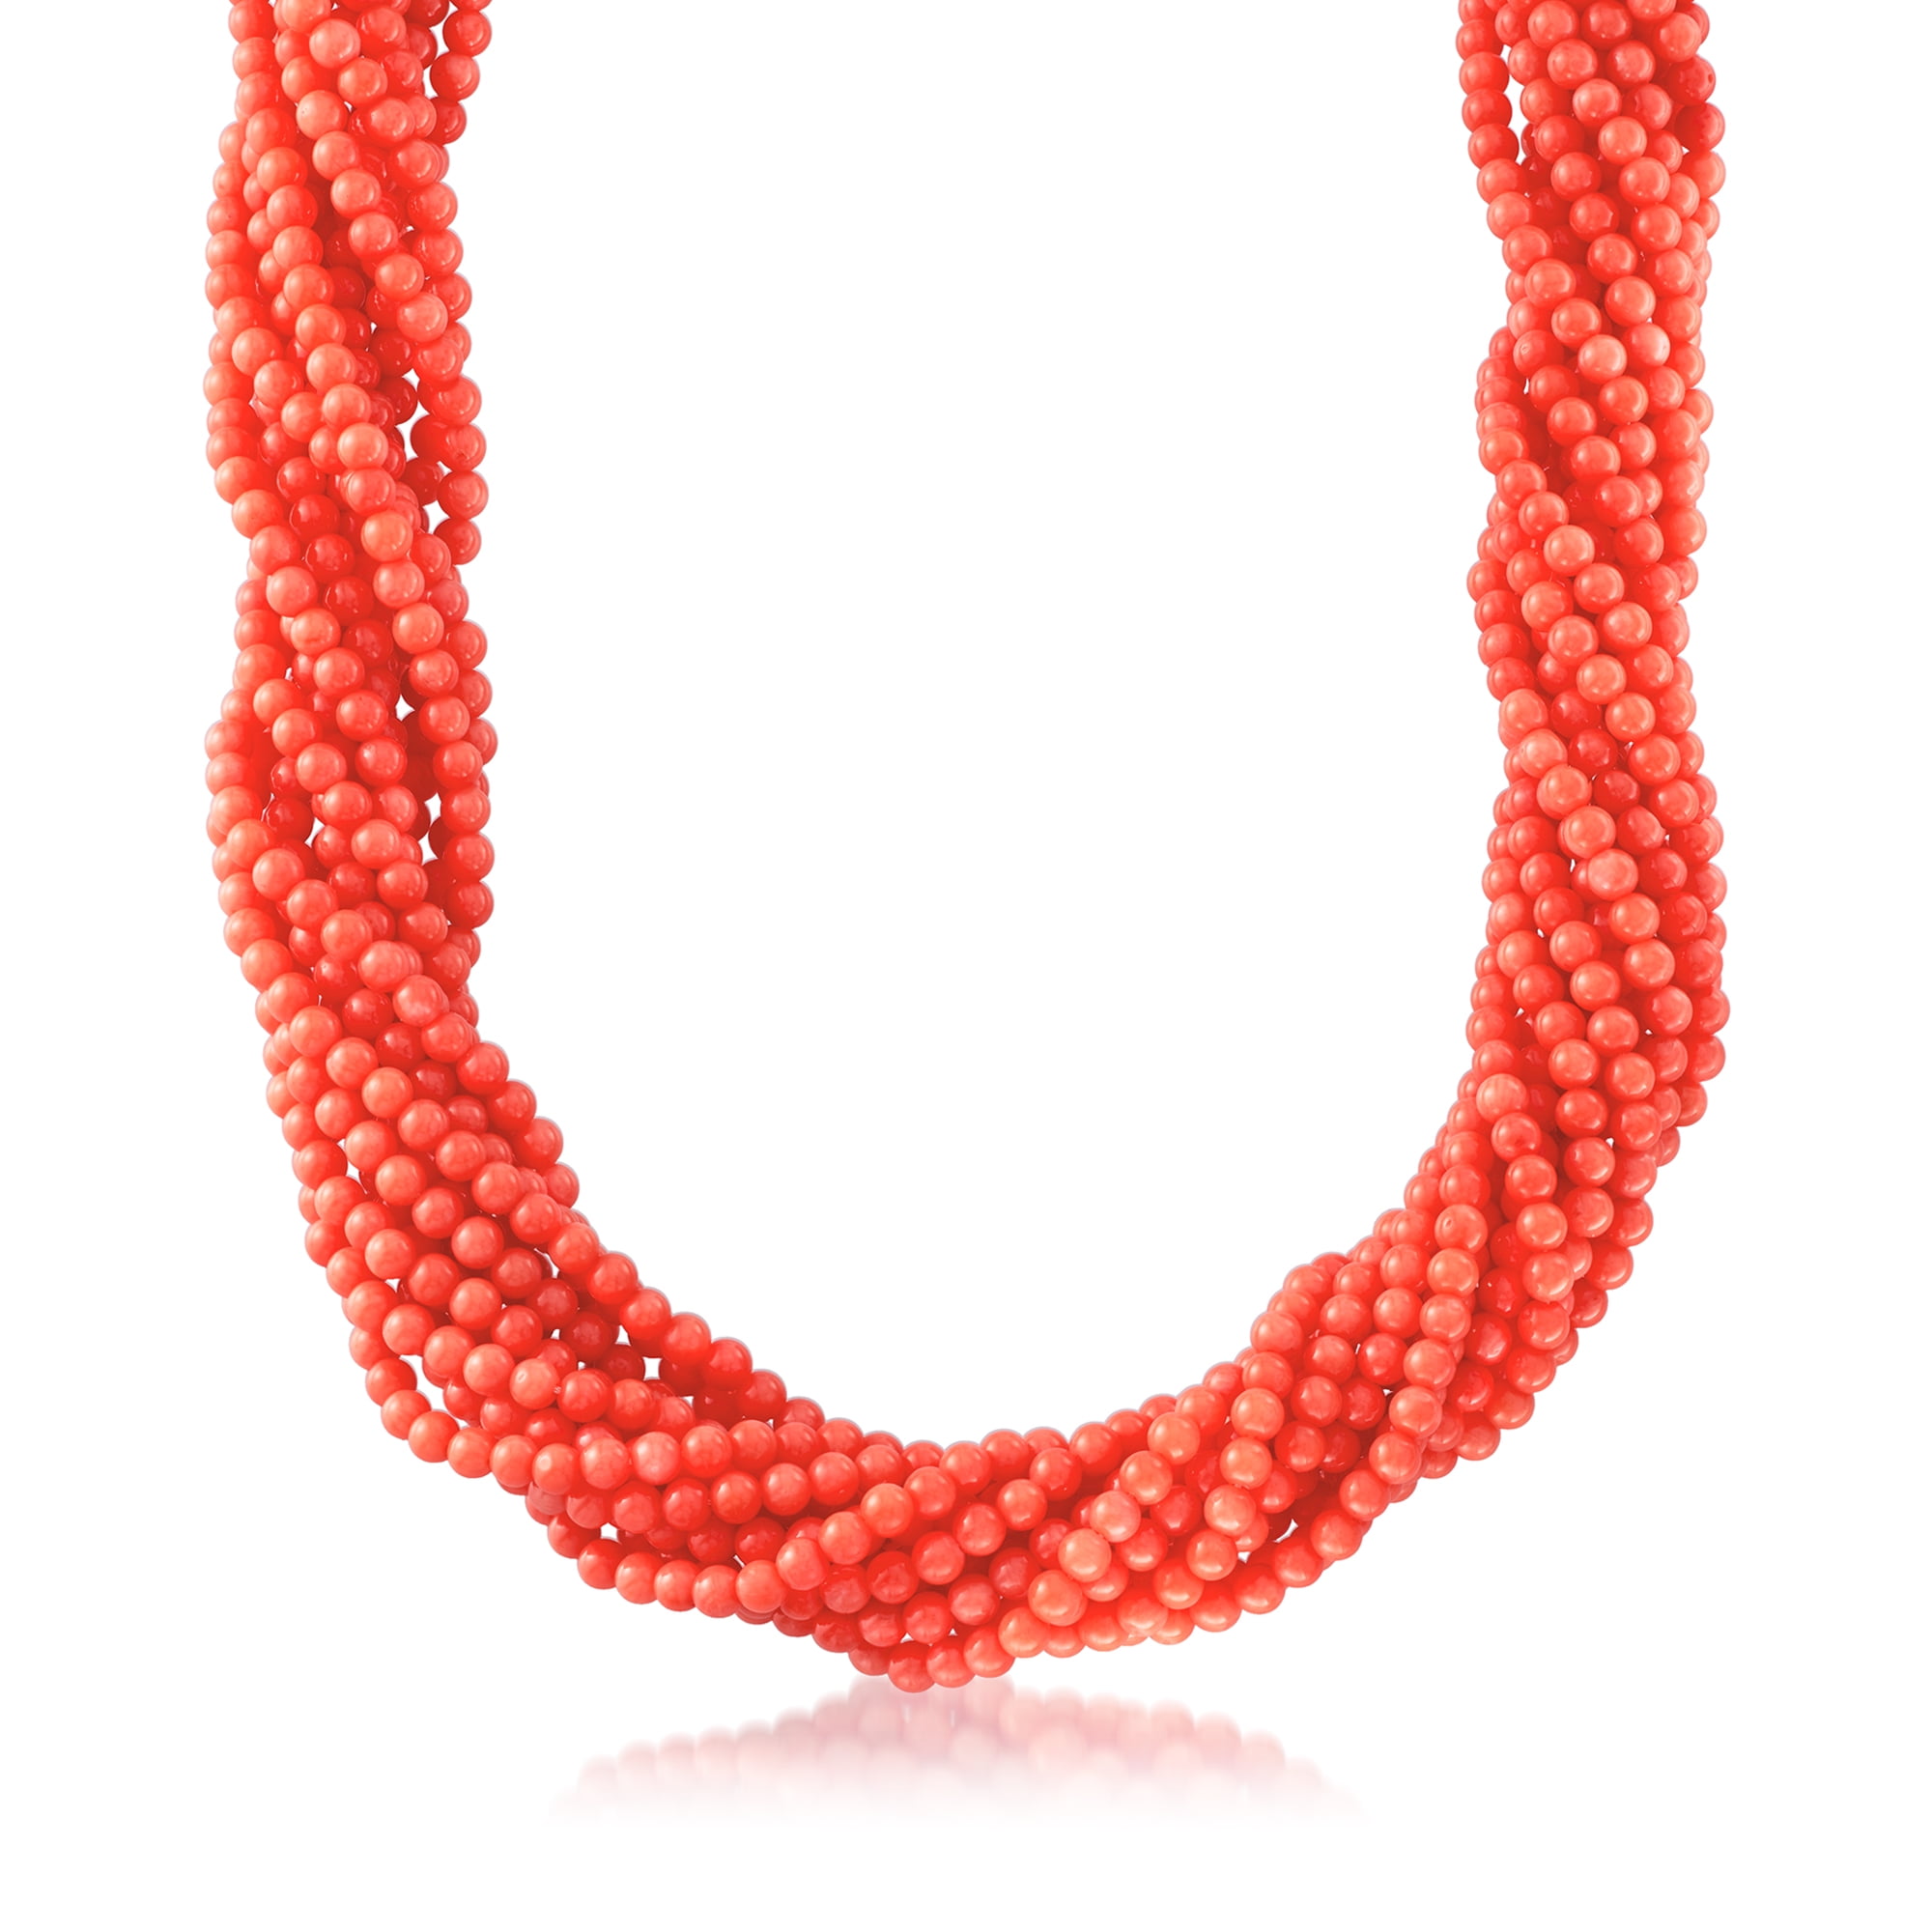 Red & gold seed bead multistrand necklace